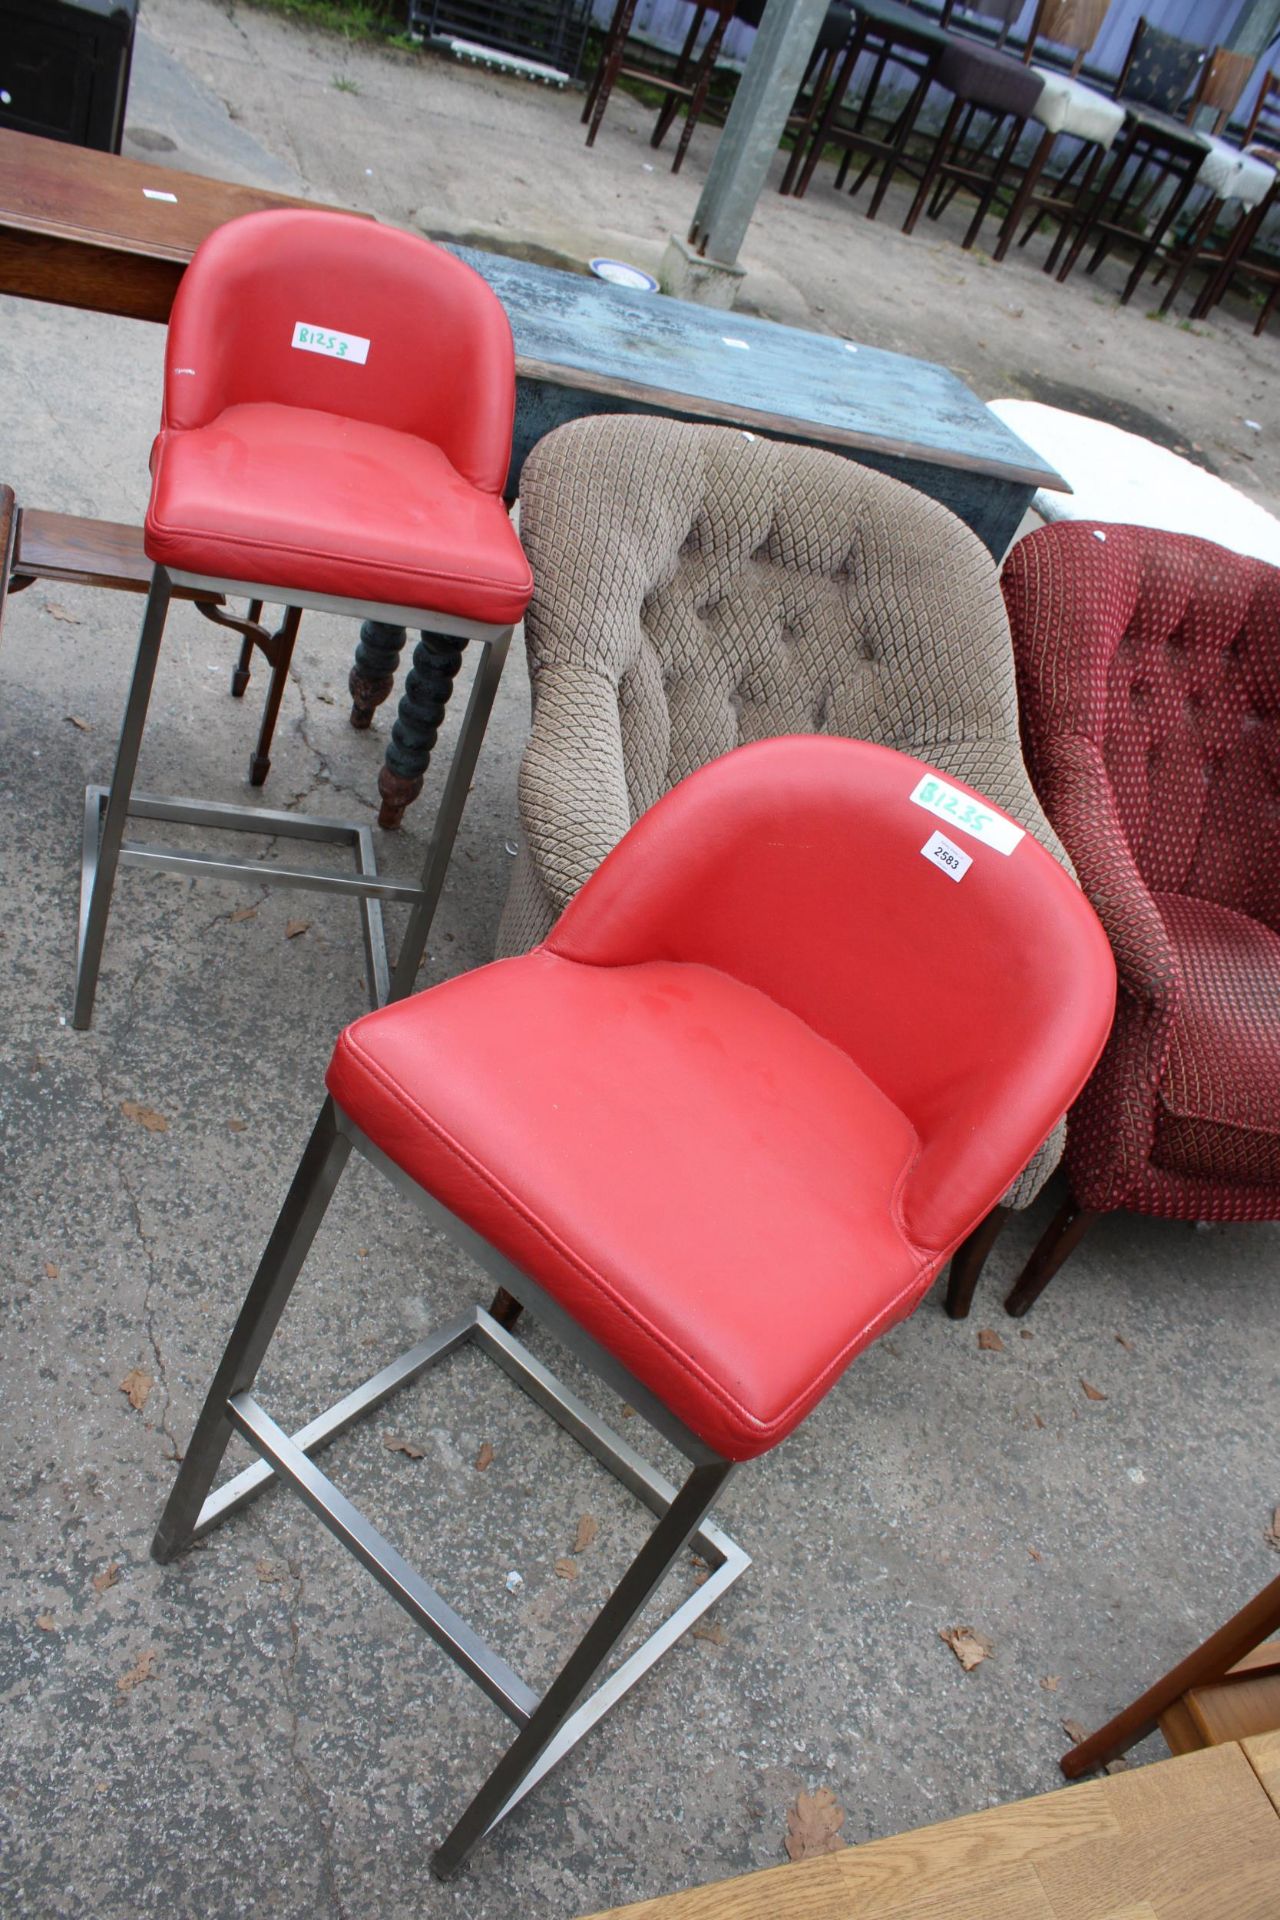 A PAIR OF HIGH BACK BAR STOOLS, STAINLESS STEEL FRAME WITH BRIGHT RED SEATS